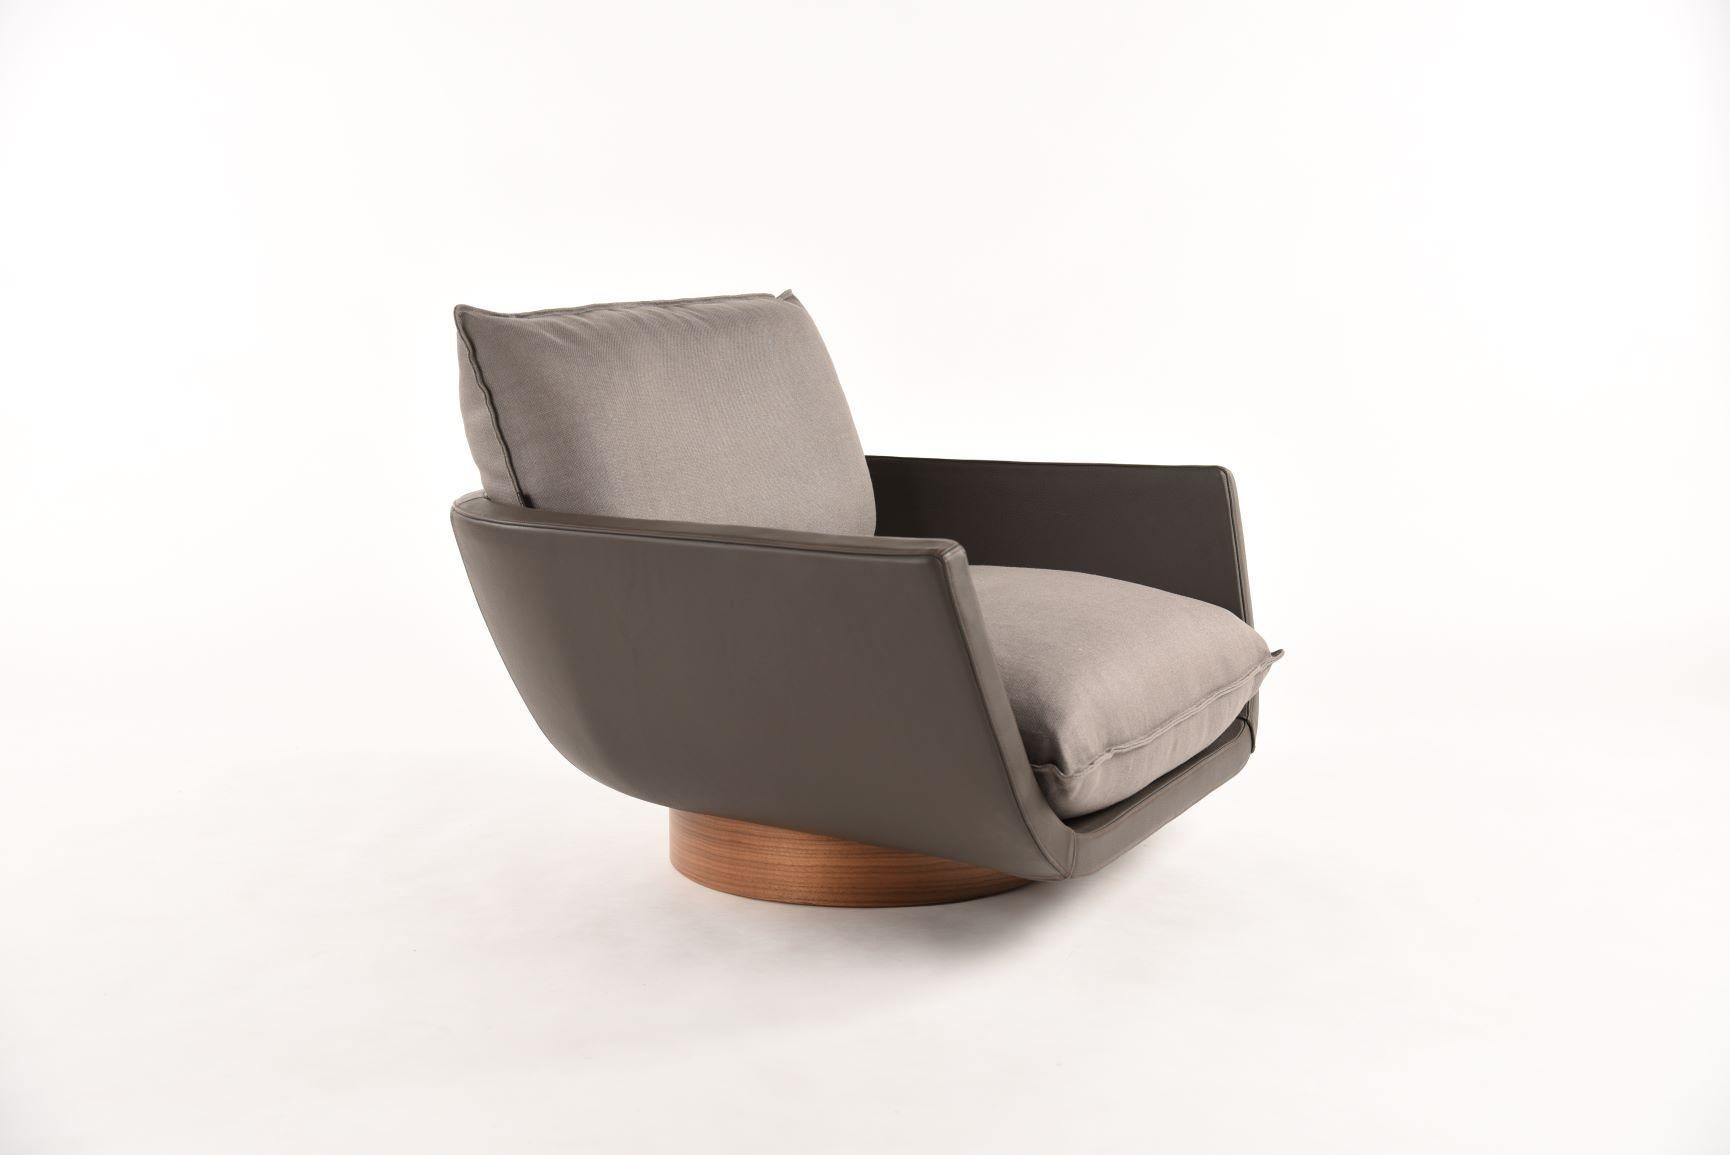 This in-stock Rua Ipanema lounge chair by Yabu Pushelberg comes in Anthracite Leather shell and Linen blend cushions on a standard height swiveling base. 

Crafted in Italy, the Rua Ipanema lounge chair comes on a standard or extra-height swivel